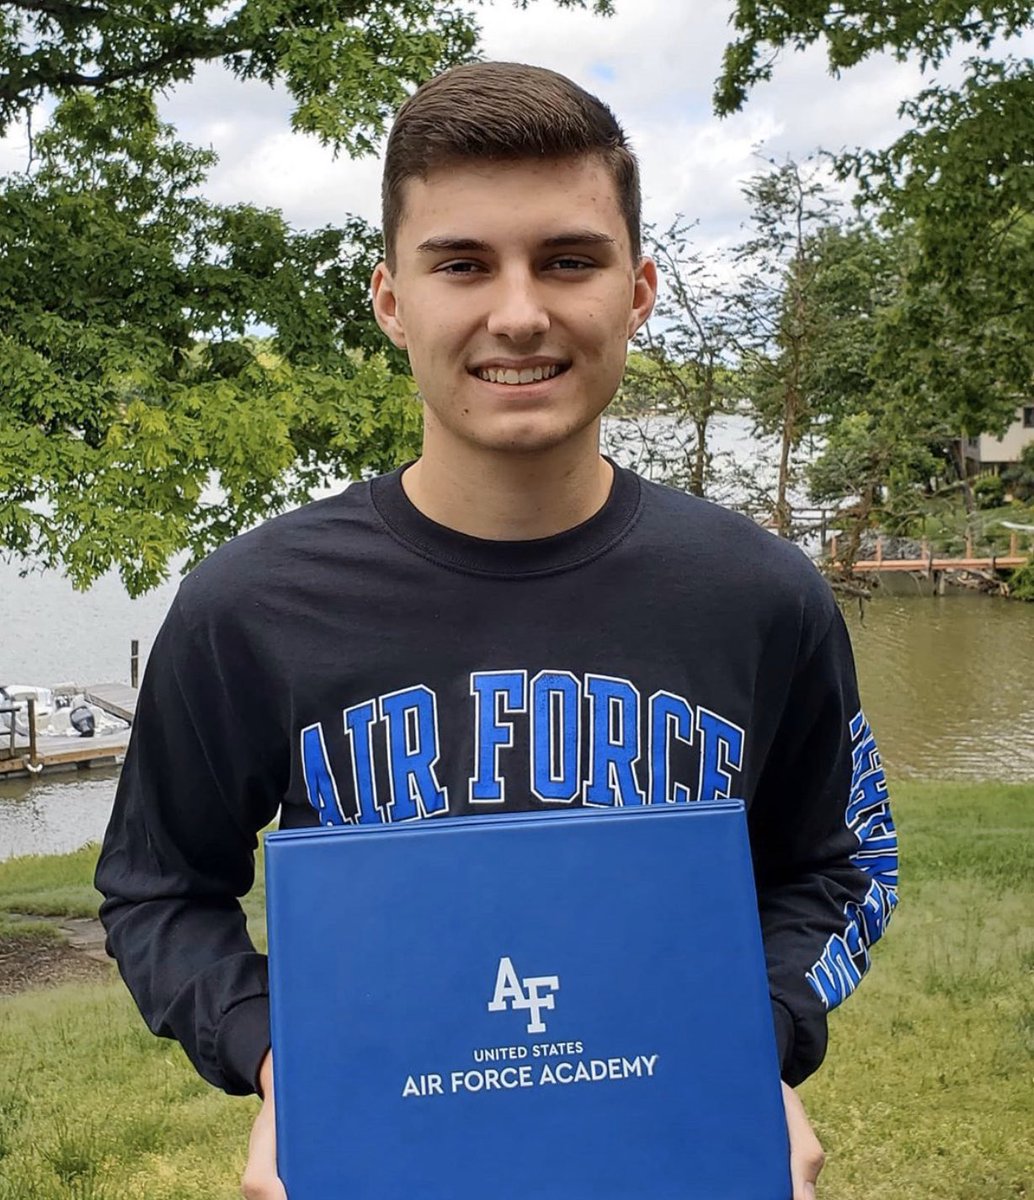 It’s official! Asa accepted his Appointment to the United States Air Force Academy. Congratulations and Aim High 🇺🇸🍀🦅✈️ #SC951 #USAFA #aimhighflyfightwin